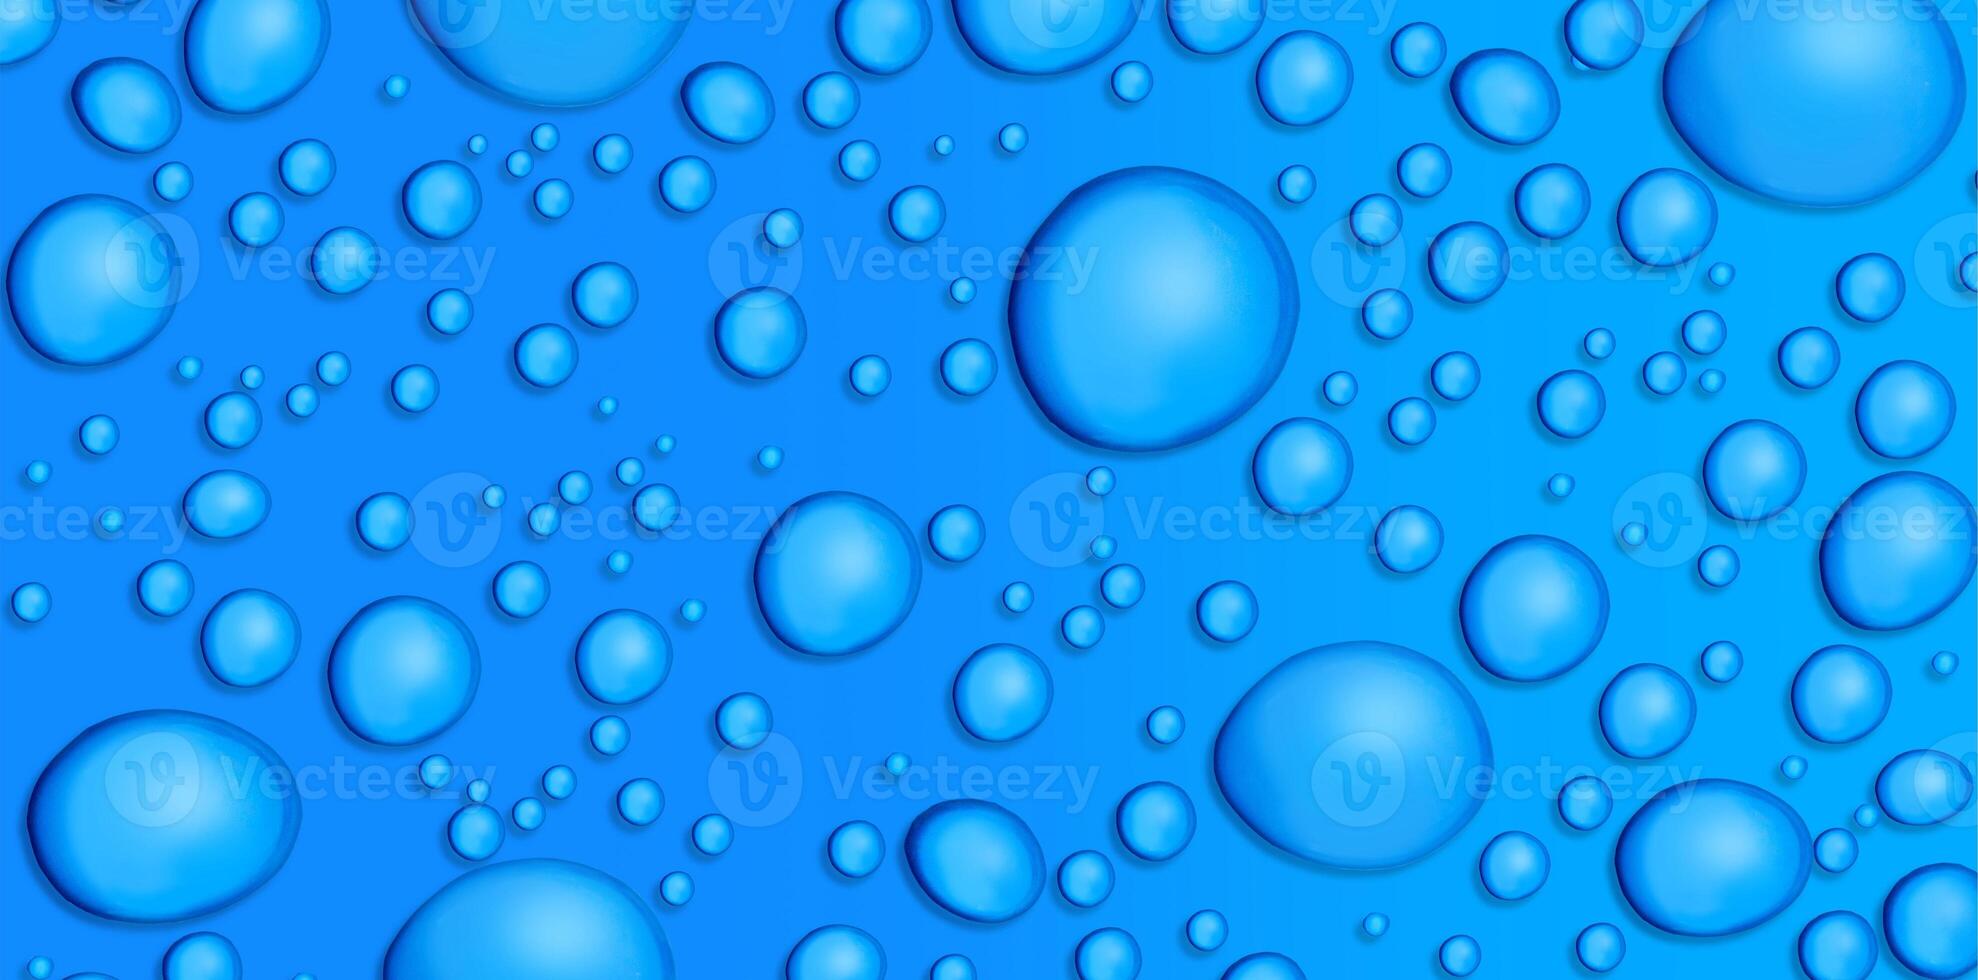 Large and small water droplets photo